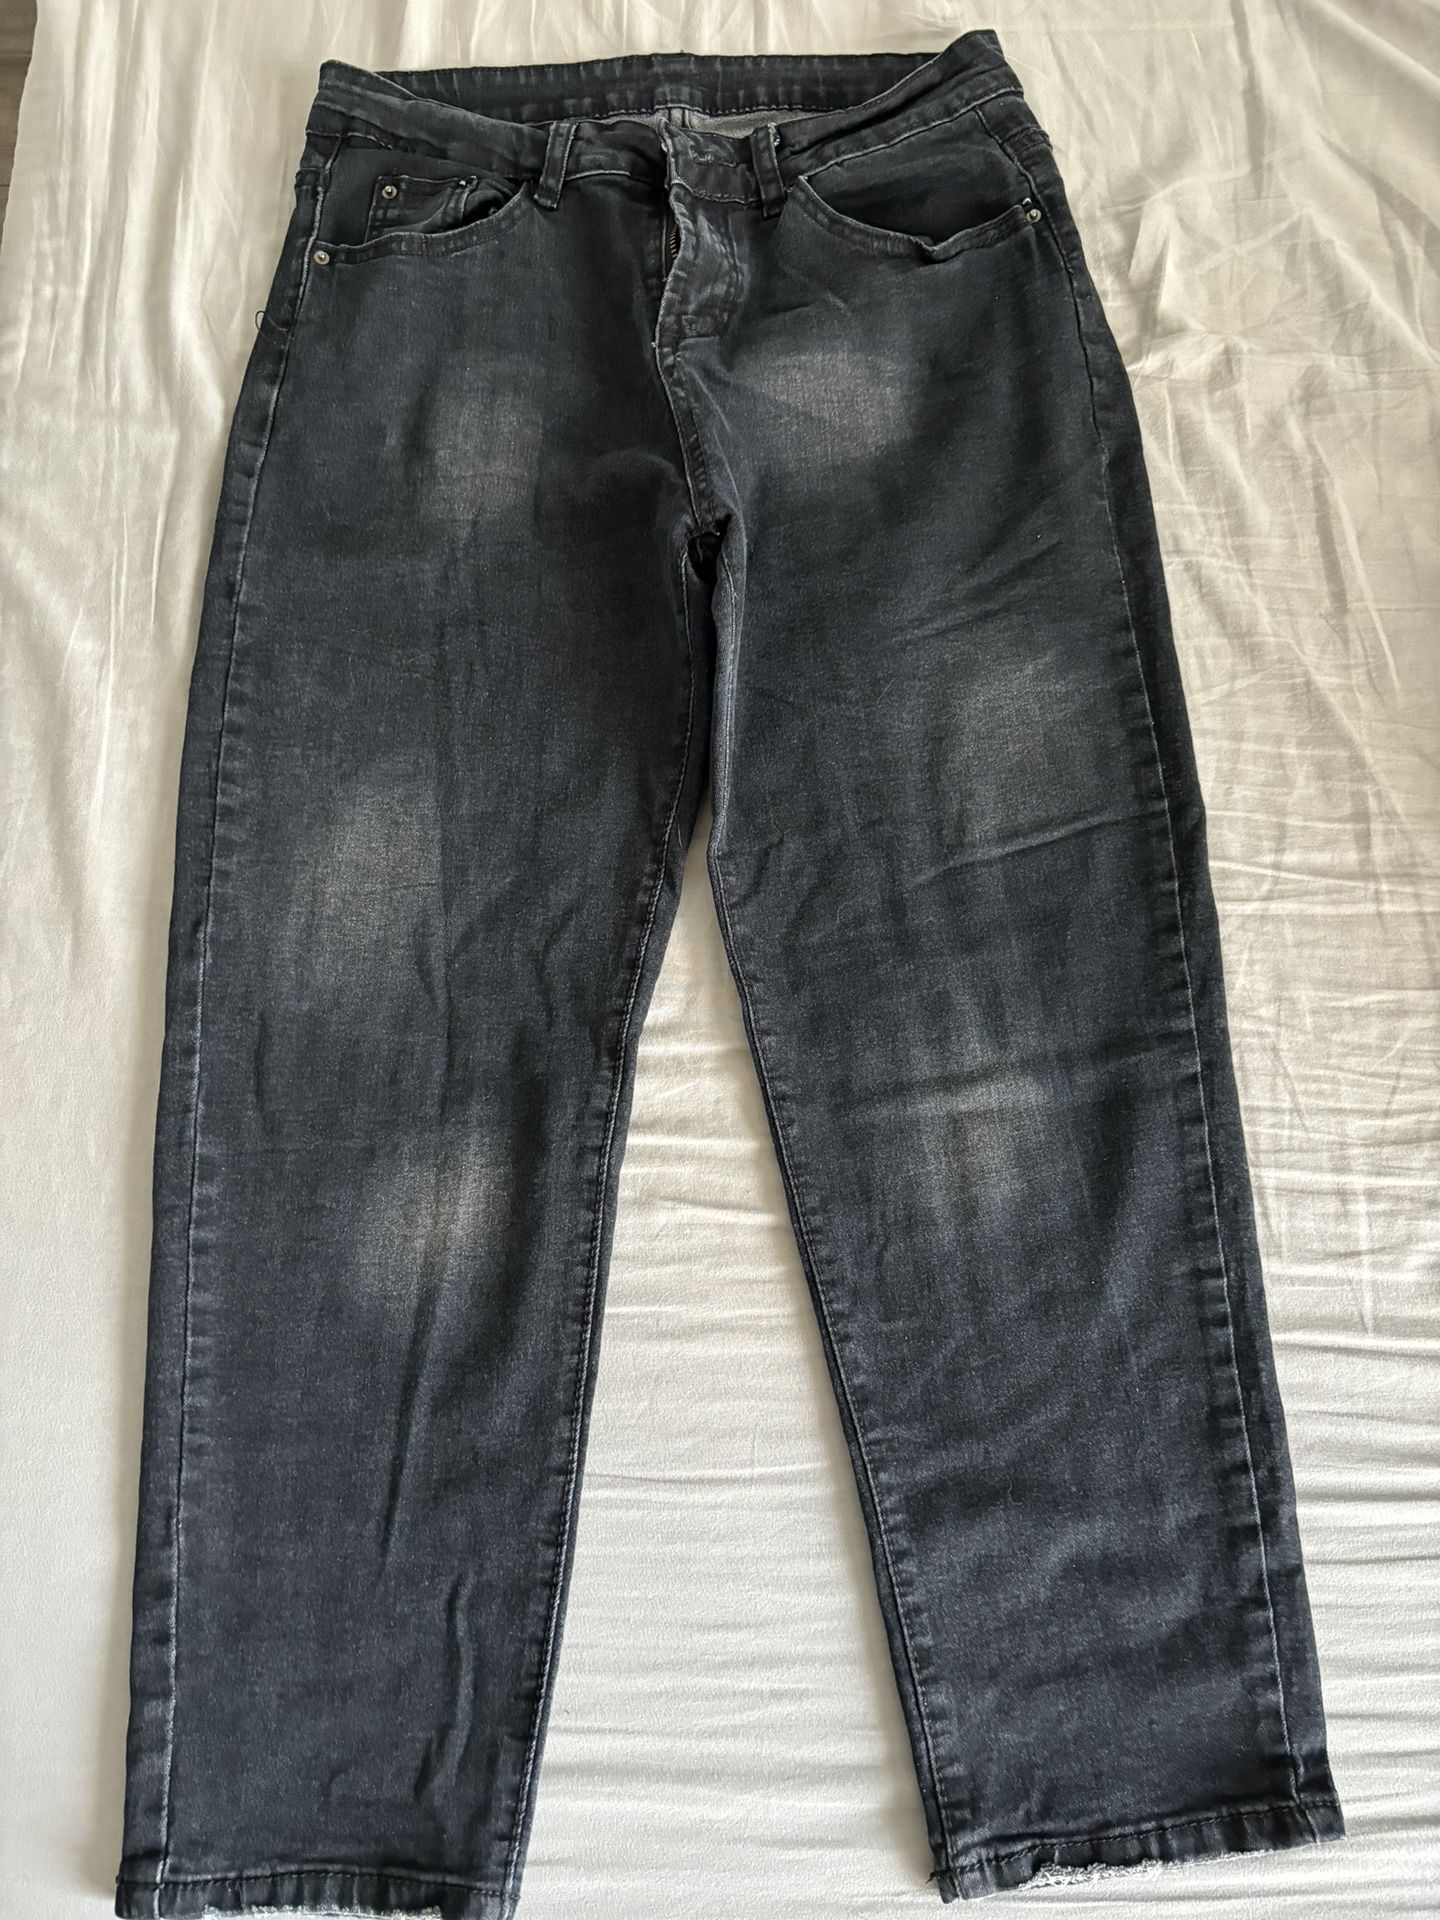 Unisex Pants Jeans Trousers, Length 34 inches, Great Faded Style Work, Size Large